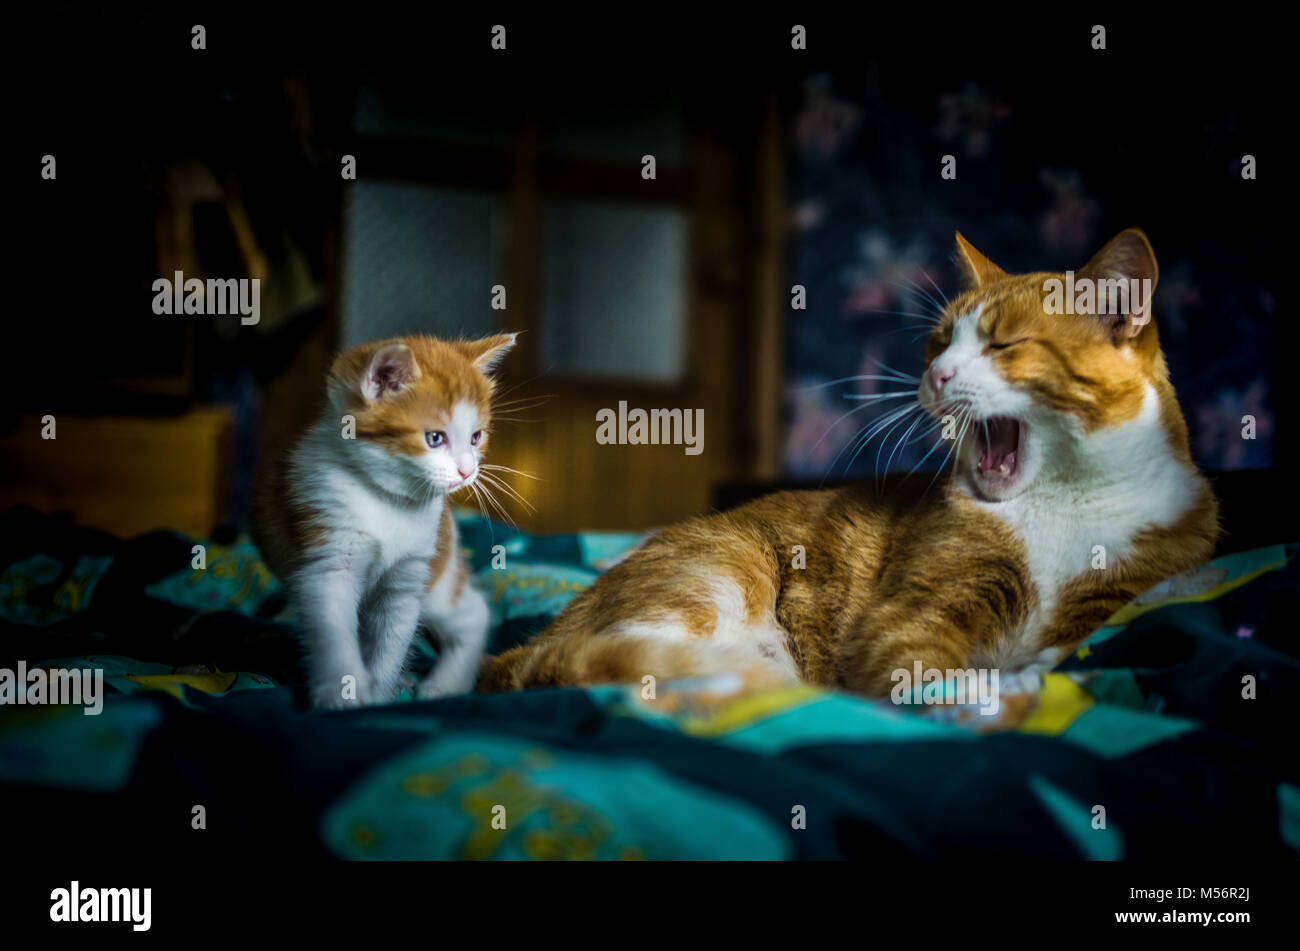 A six week old kitten watches mother cat's morning yawn. Stock Photo